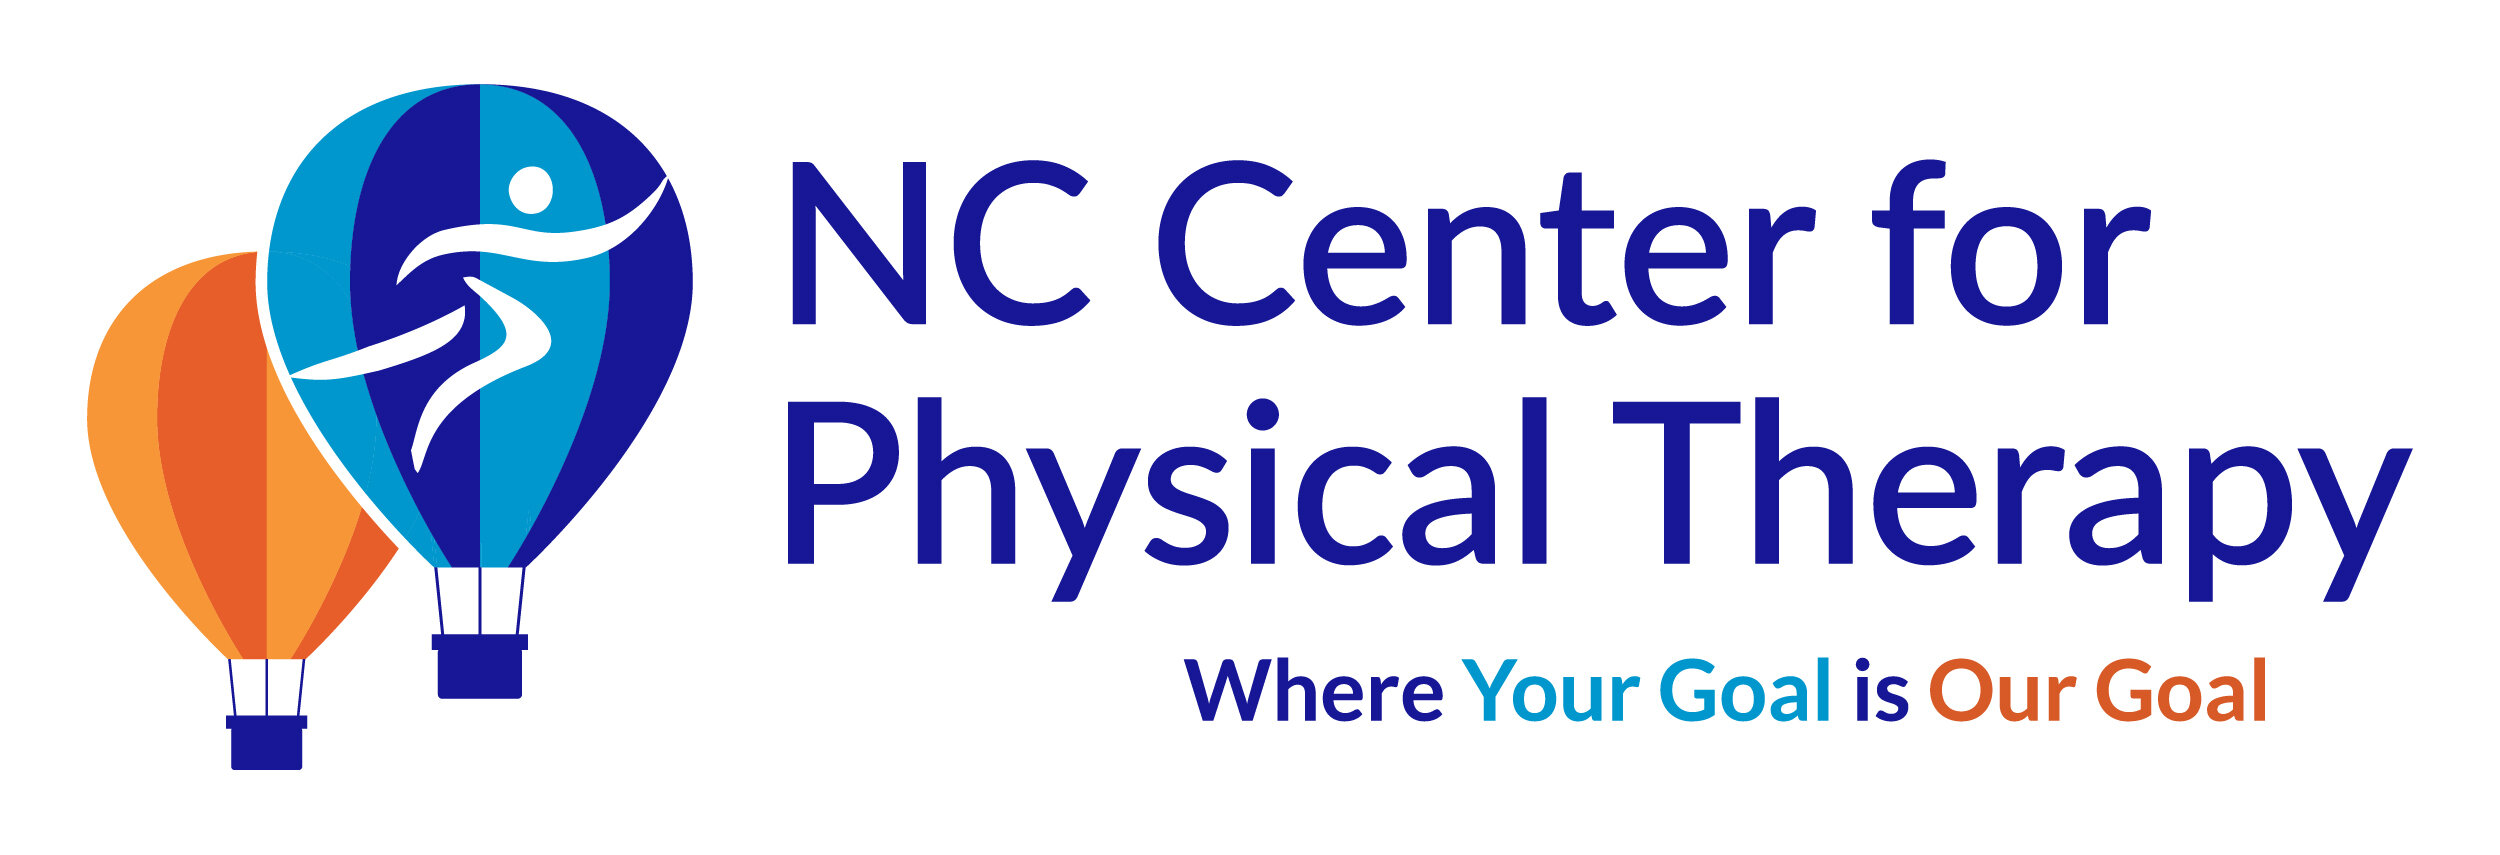 NC Center for Physical Therapy